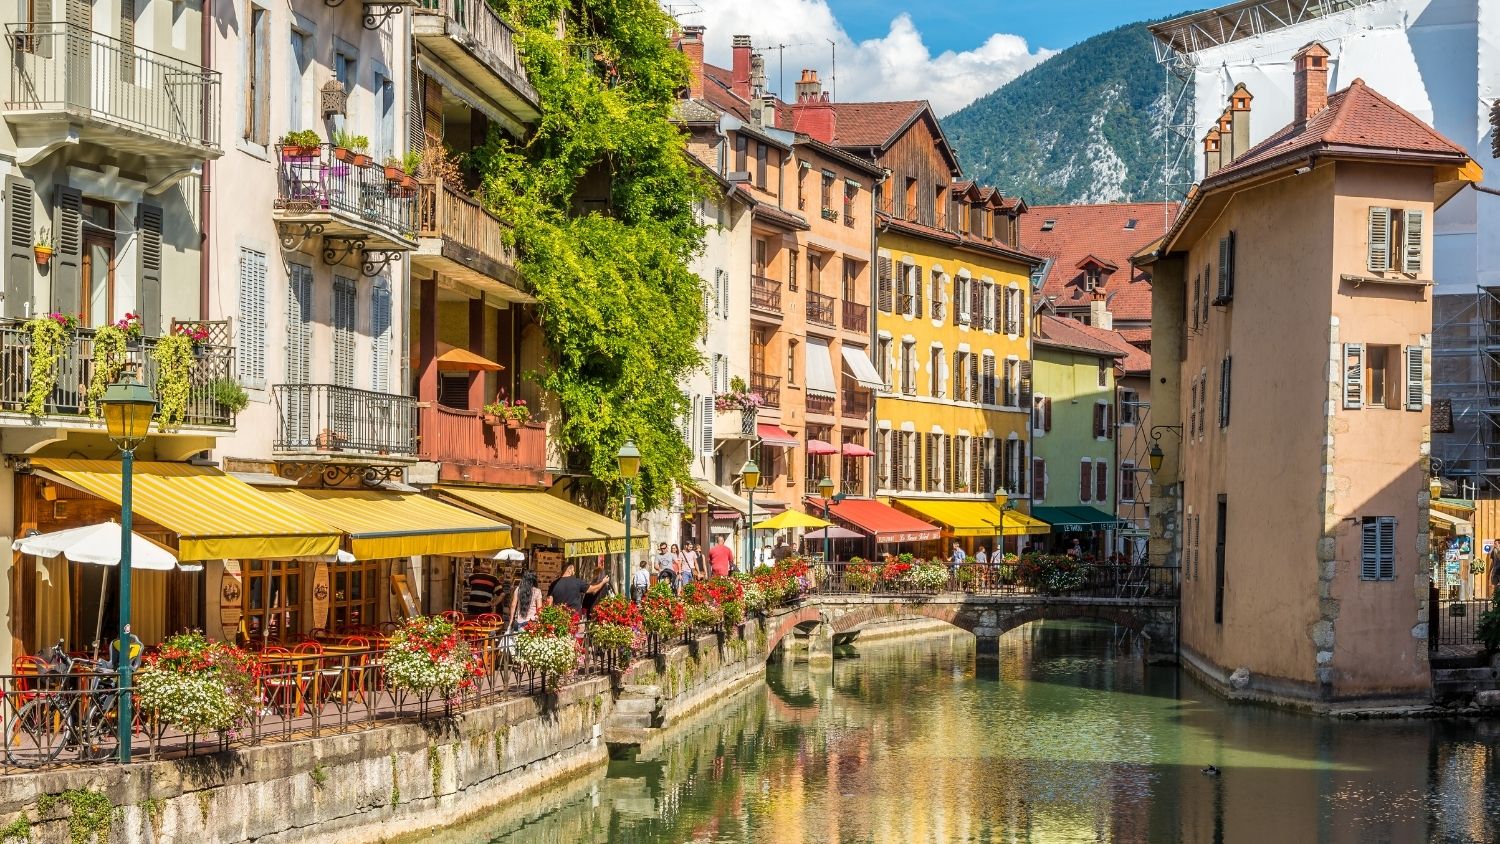 Annecy is the largest city of Haute Savoie department in the Auvergne Rhone Alpes region in southeastern France.